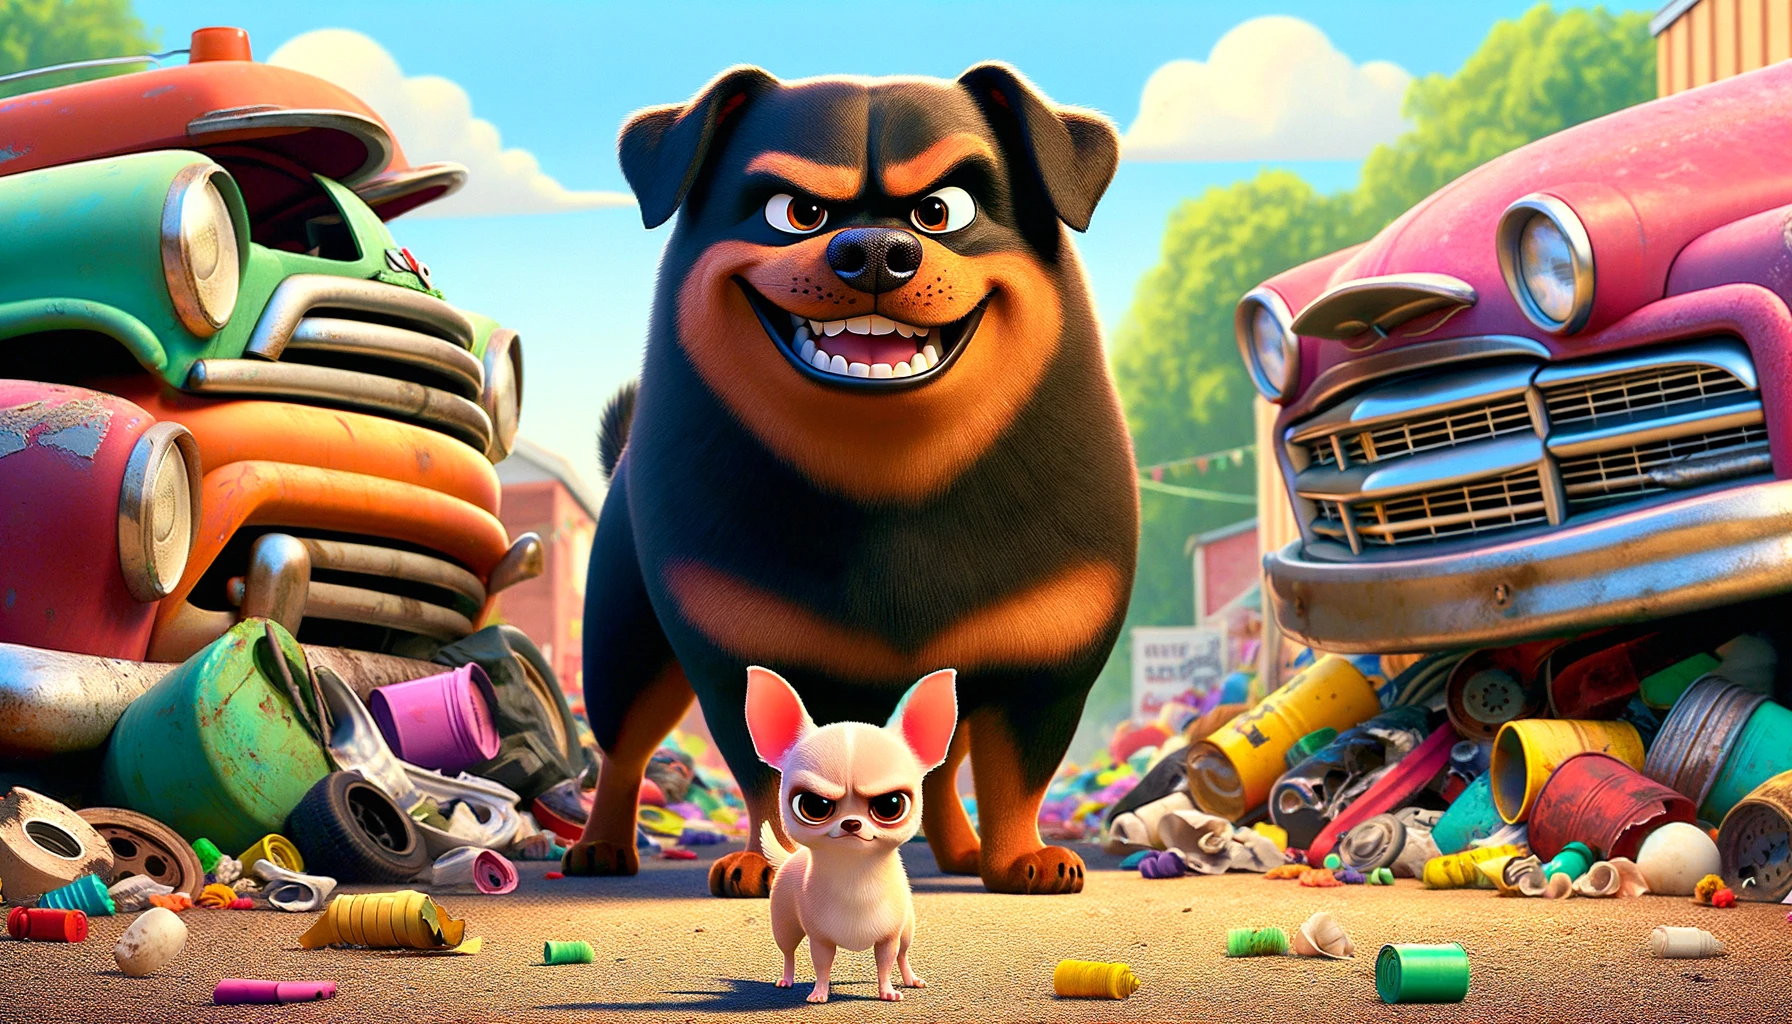 A Pixar-style cartoon of a mean-looking chihuahua guarding a junkyard with a laughing rottweiler in the background, embodying "as mean as a junkyard dog."